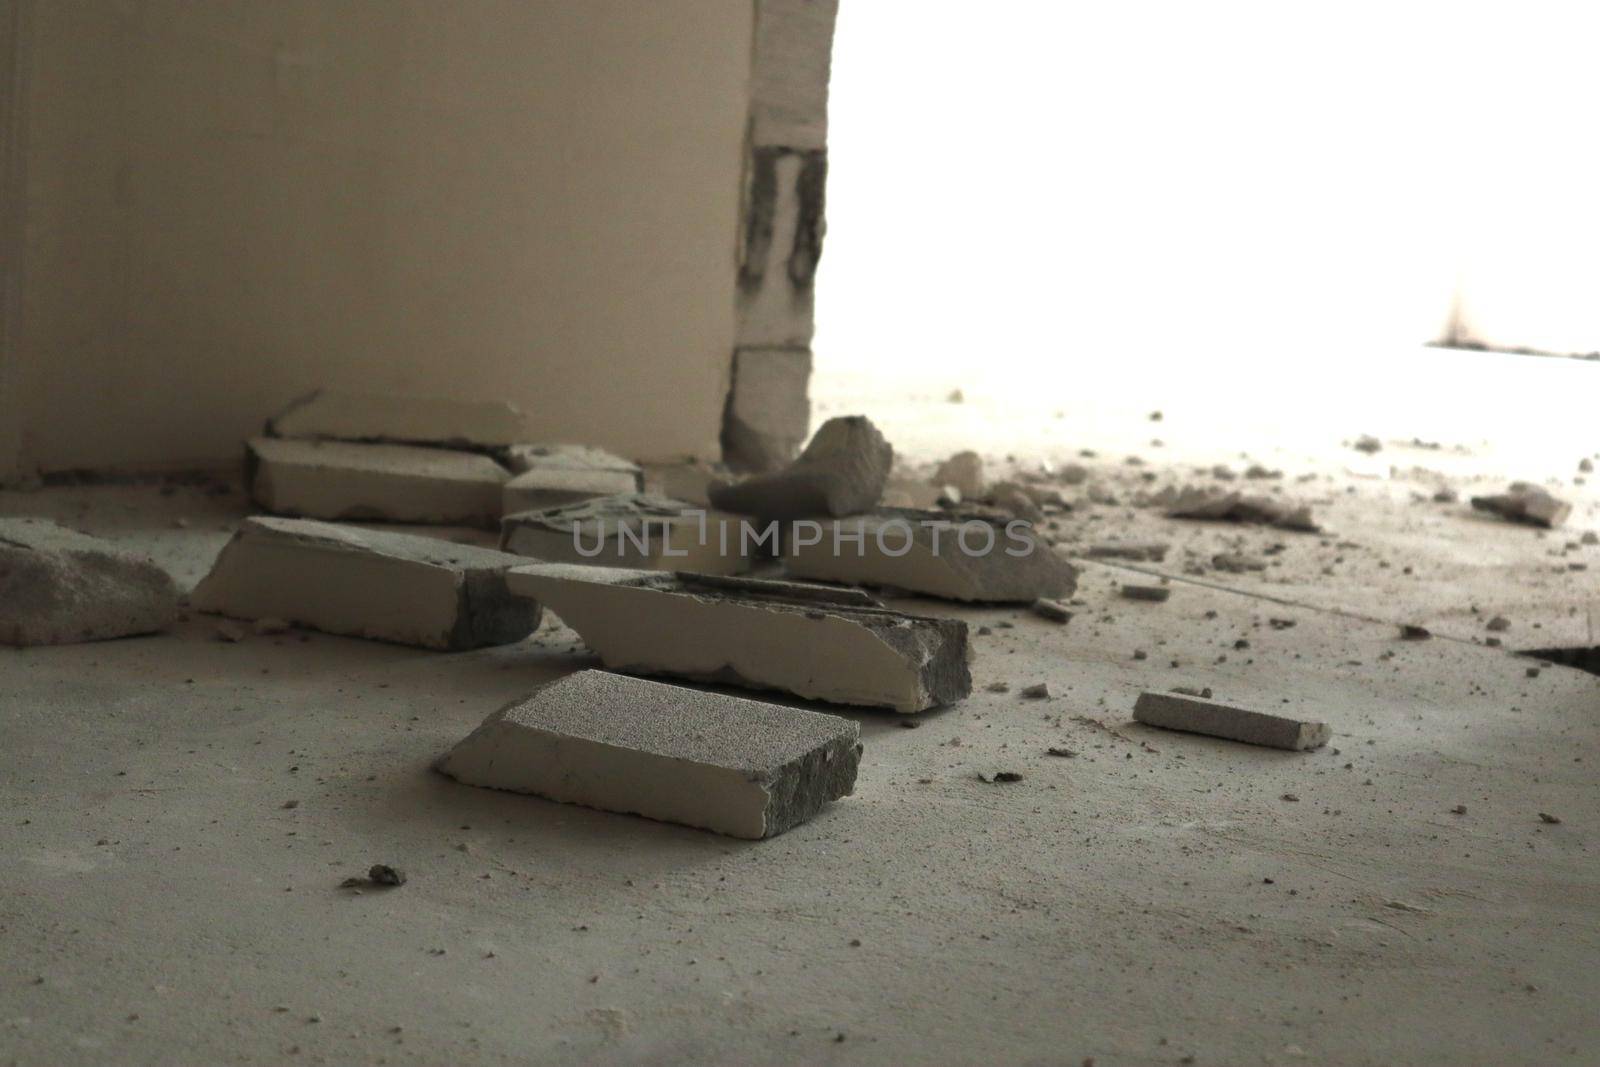 Remains of construction debris in the apartment by SemFid